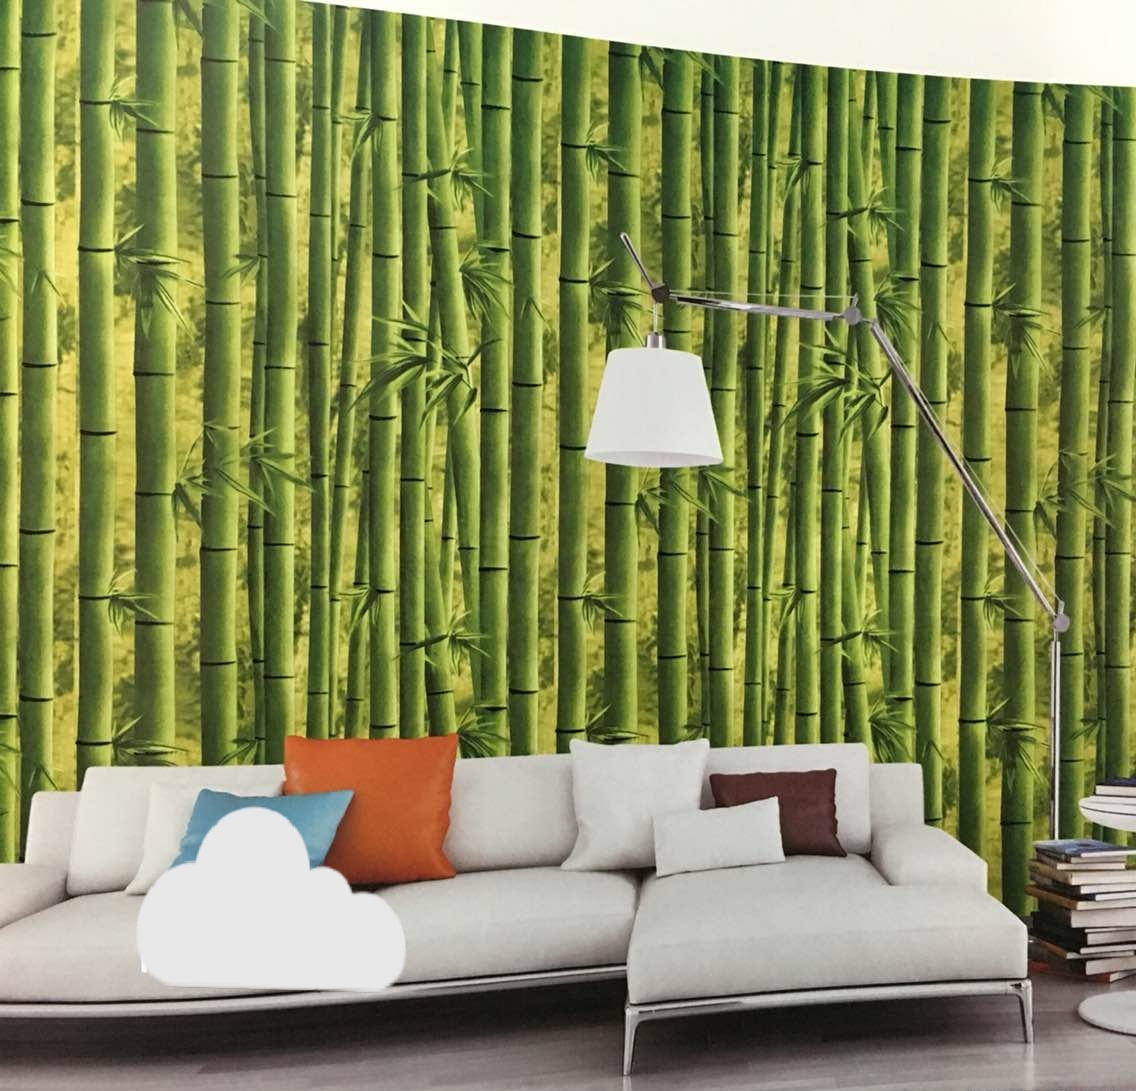 Products - Green Wallpaper Design For Living Room - HD Wallpaper 